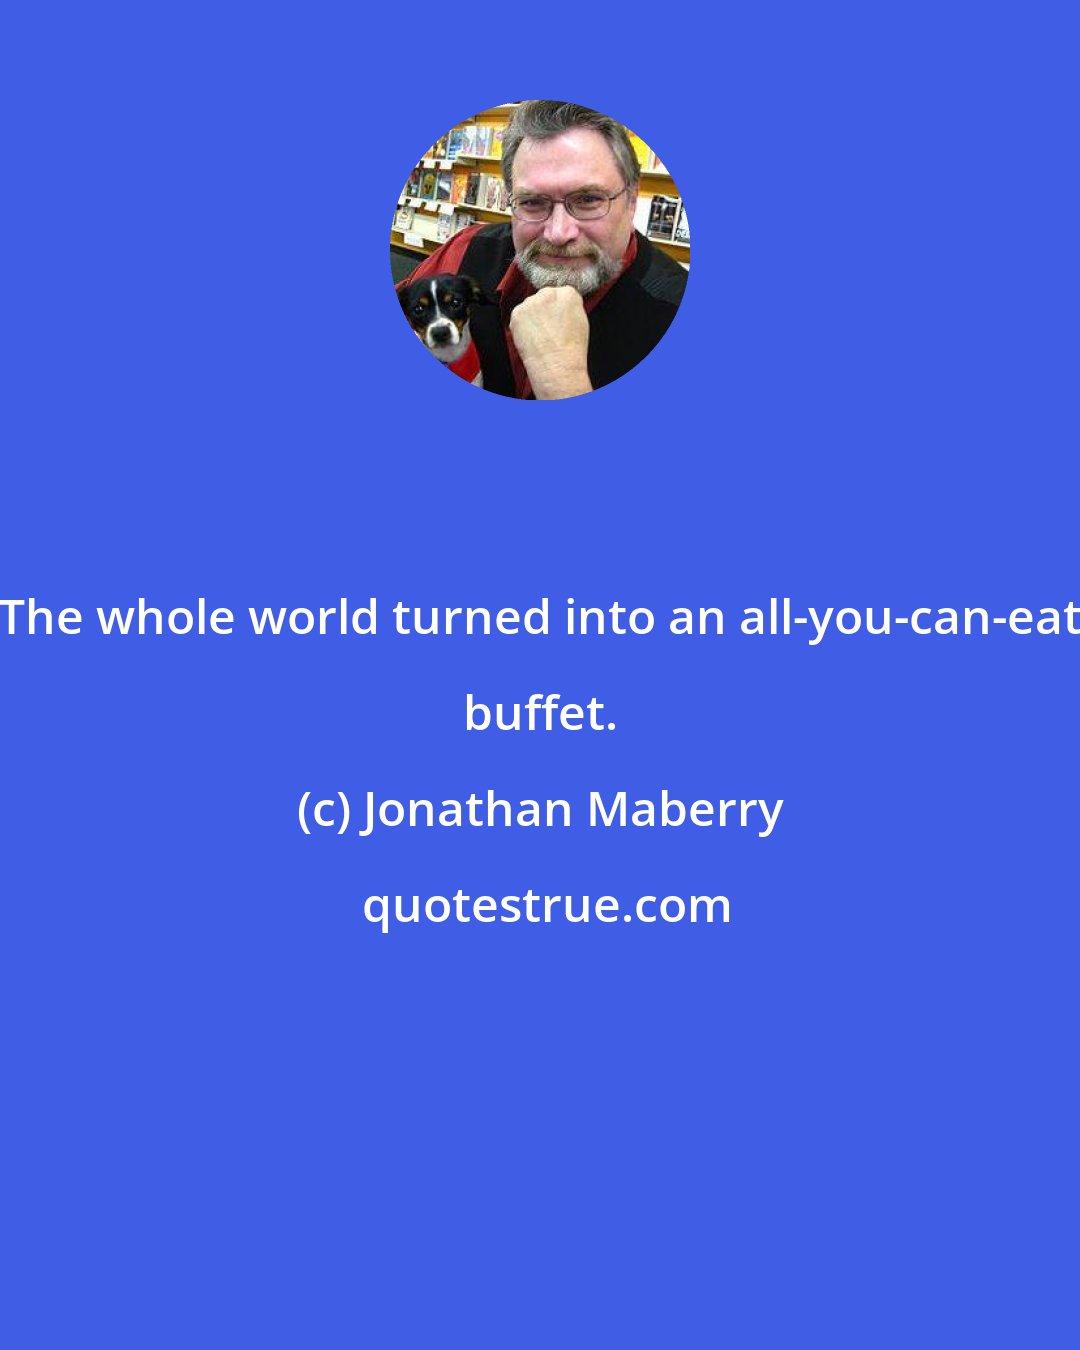 Jonathan Maberry: The whole world turned into an all-you-can-eat buffet.